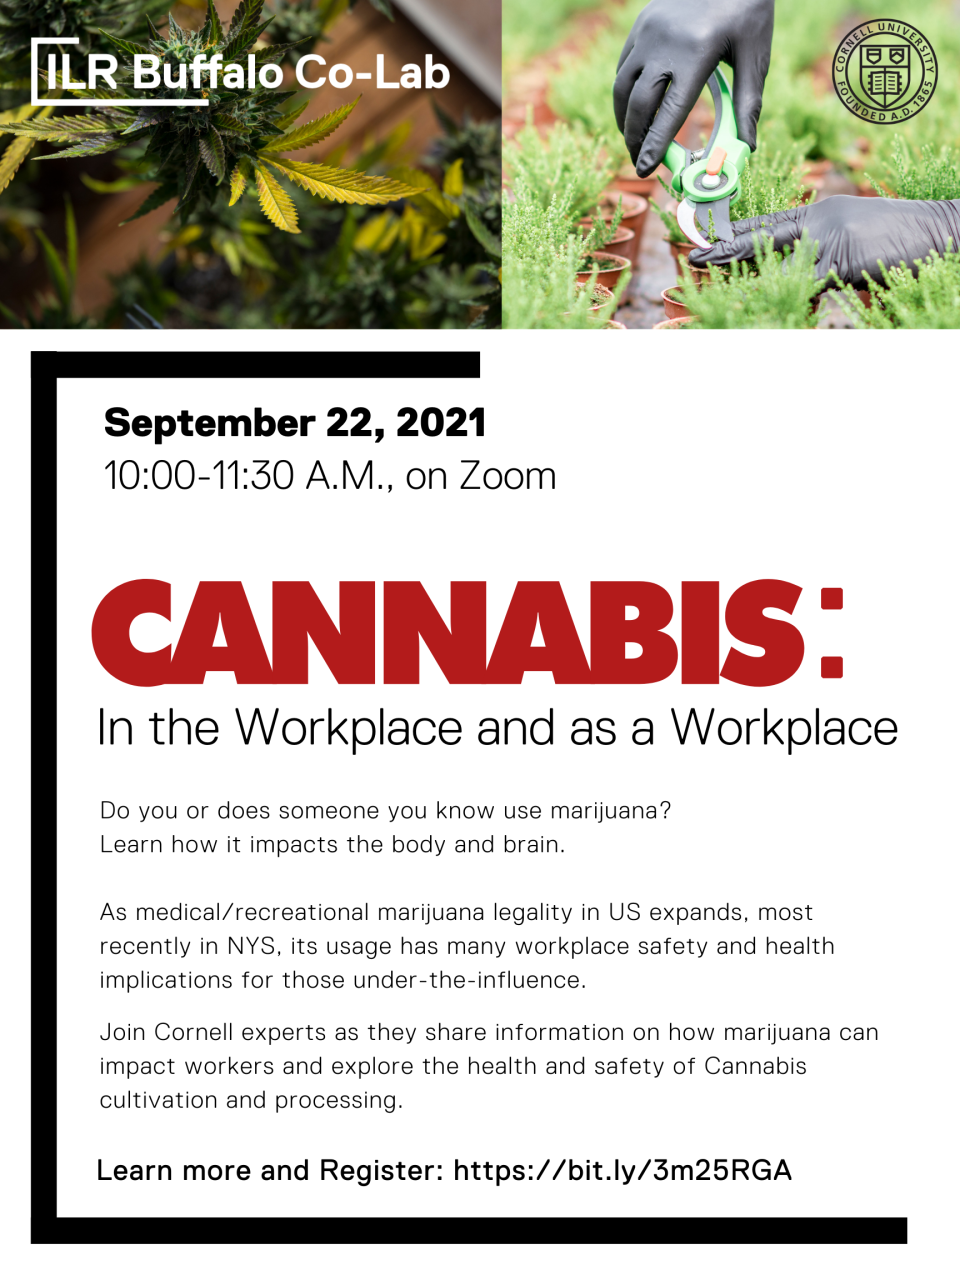 Cannabis: In the Workplace and as a Workplace